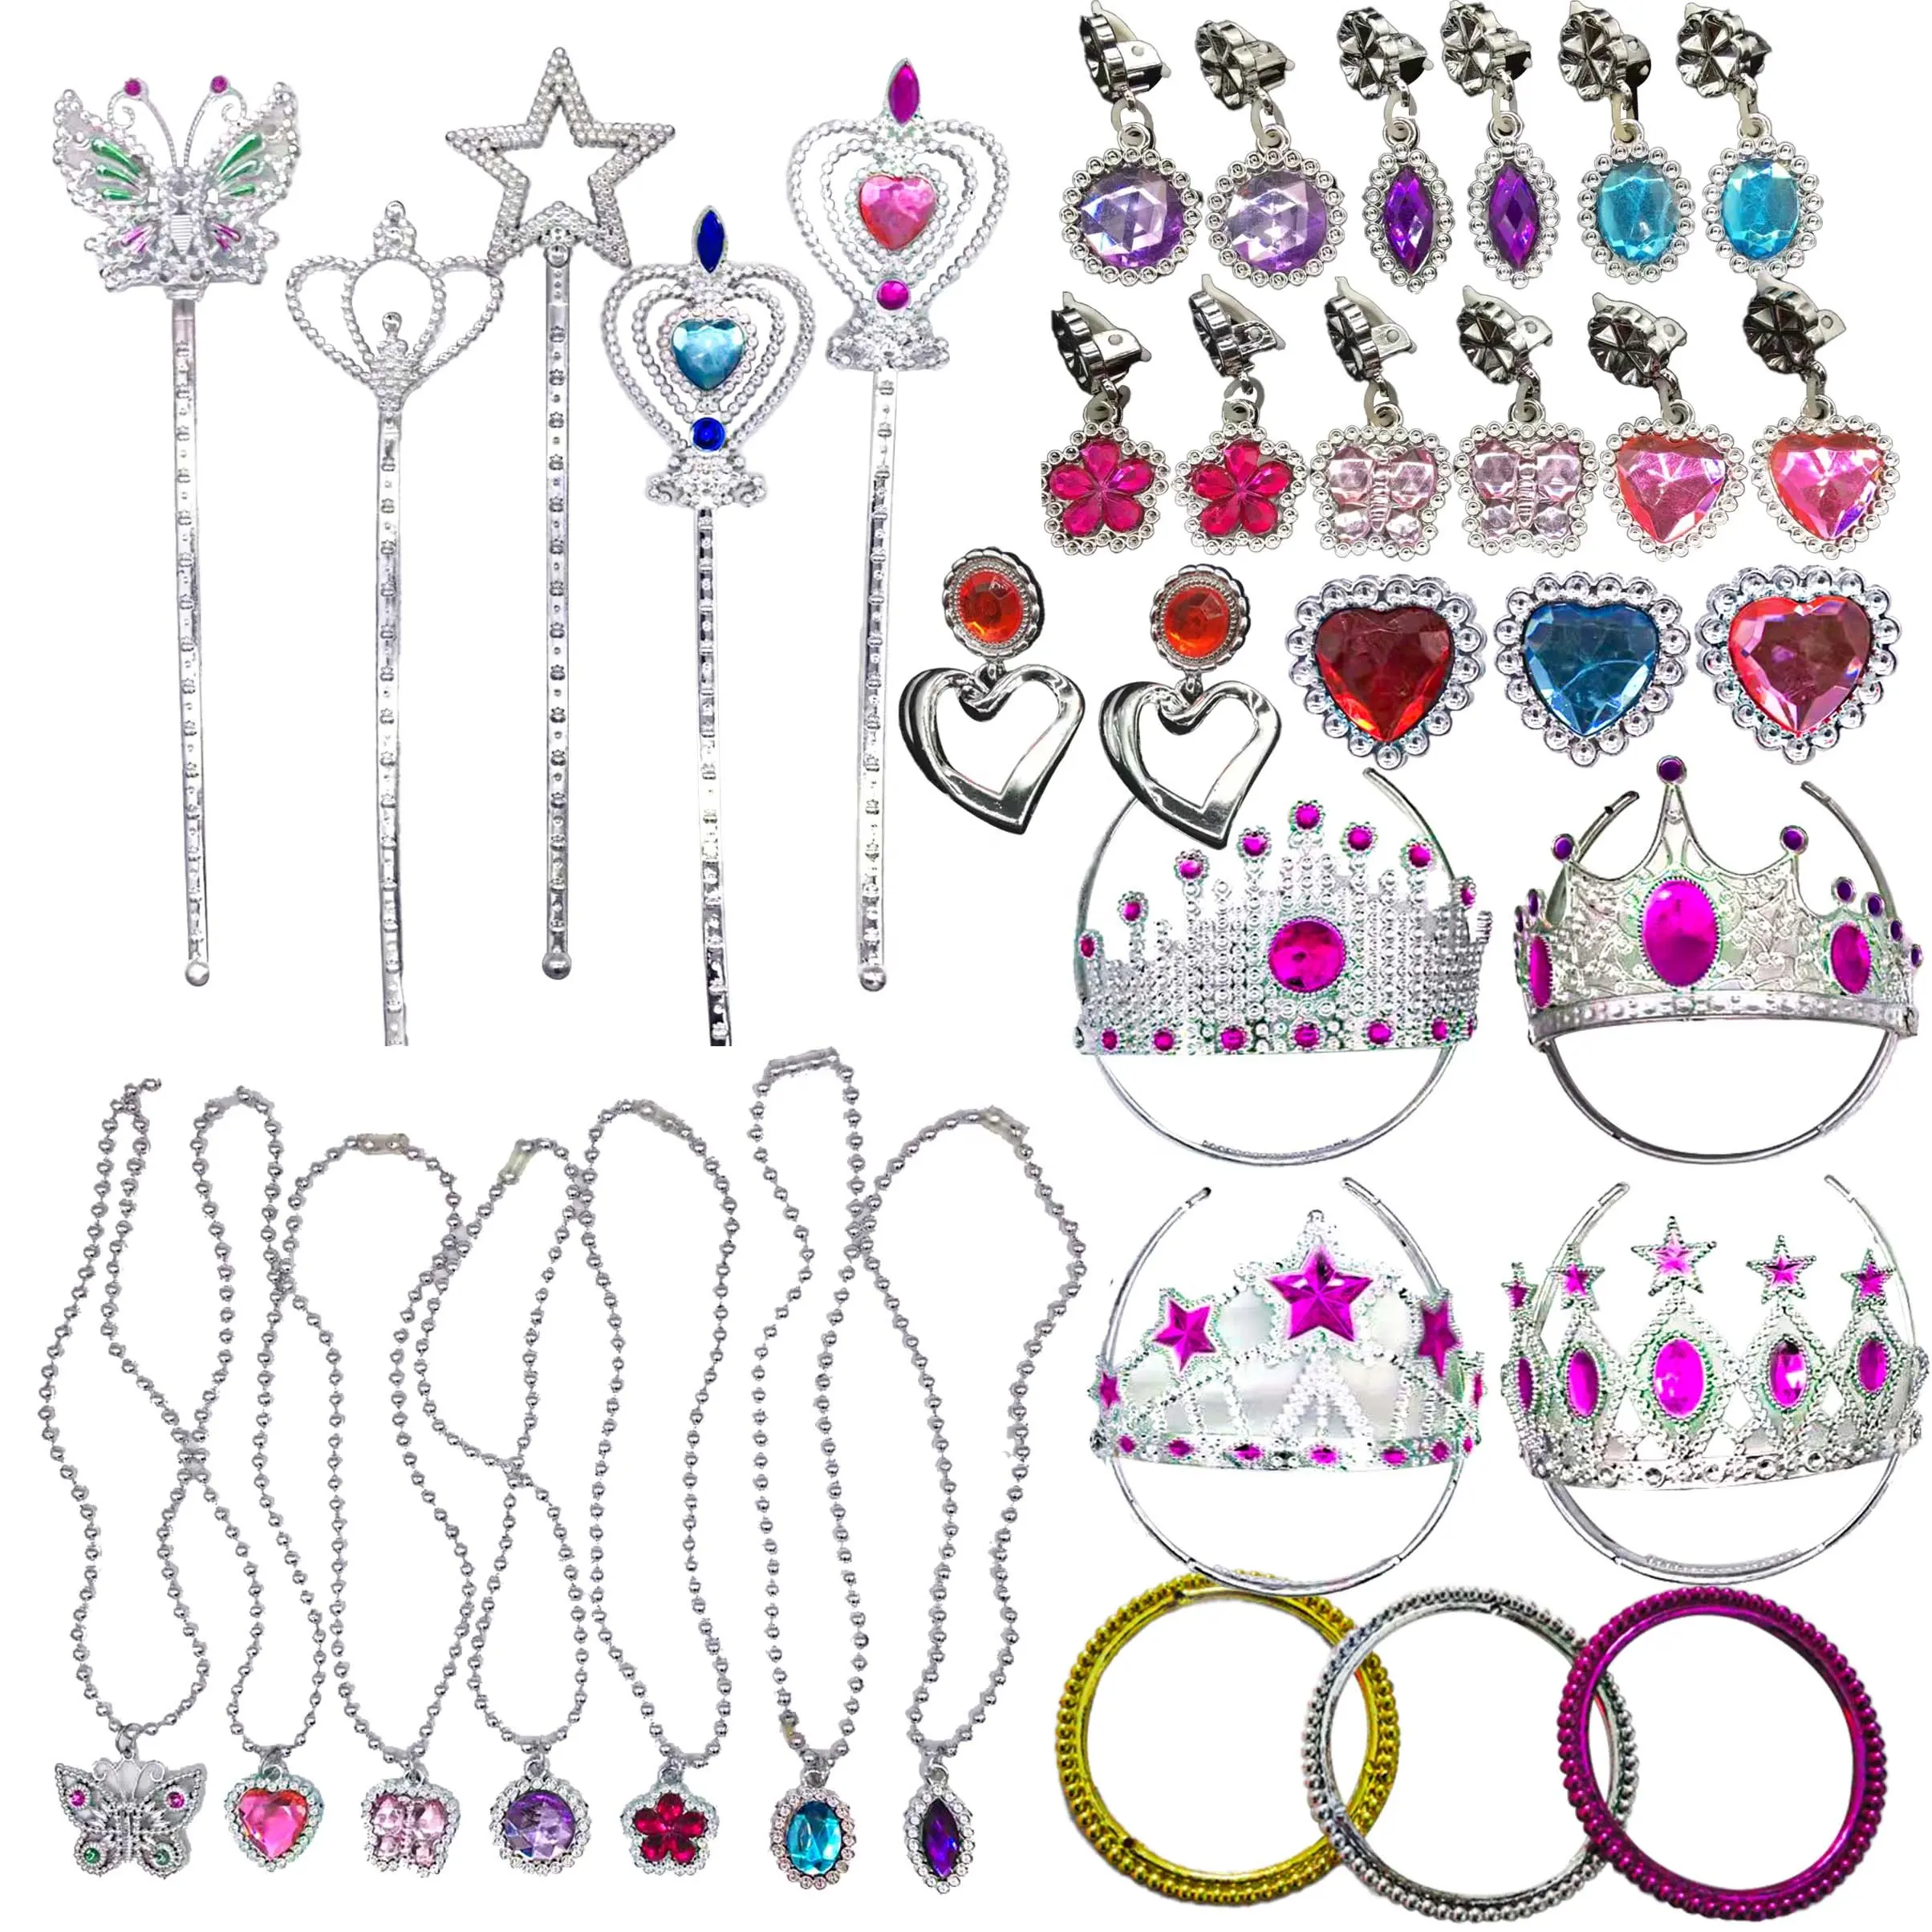 Customized Pretend Play Girl Jewelry Toys Set Fairy Princess Crown Wand Necklace Bracelet Ring Earring Dress Up Toys for Girls